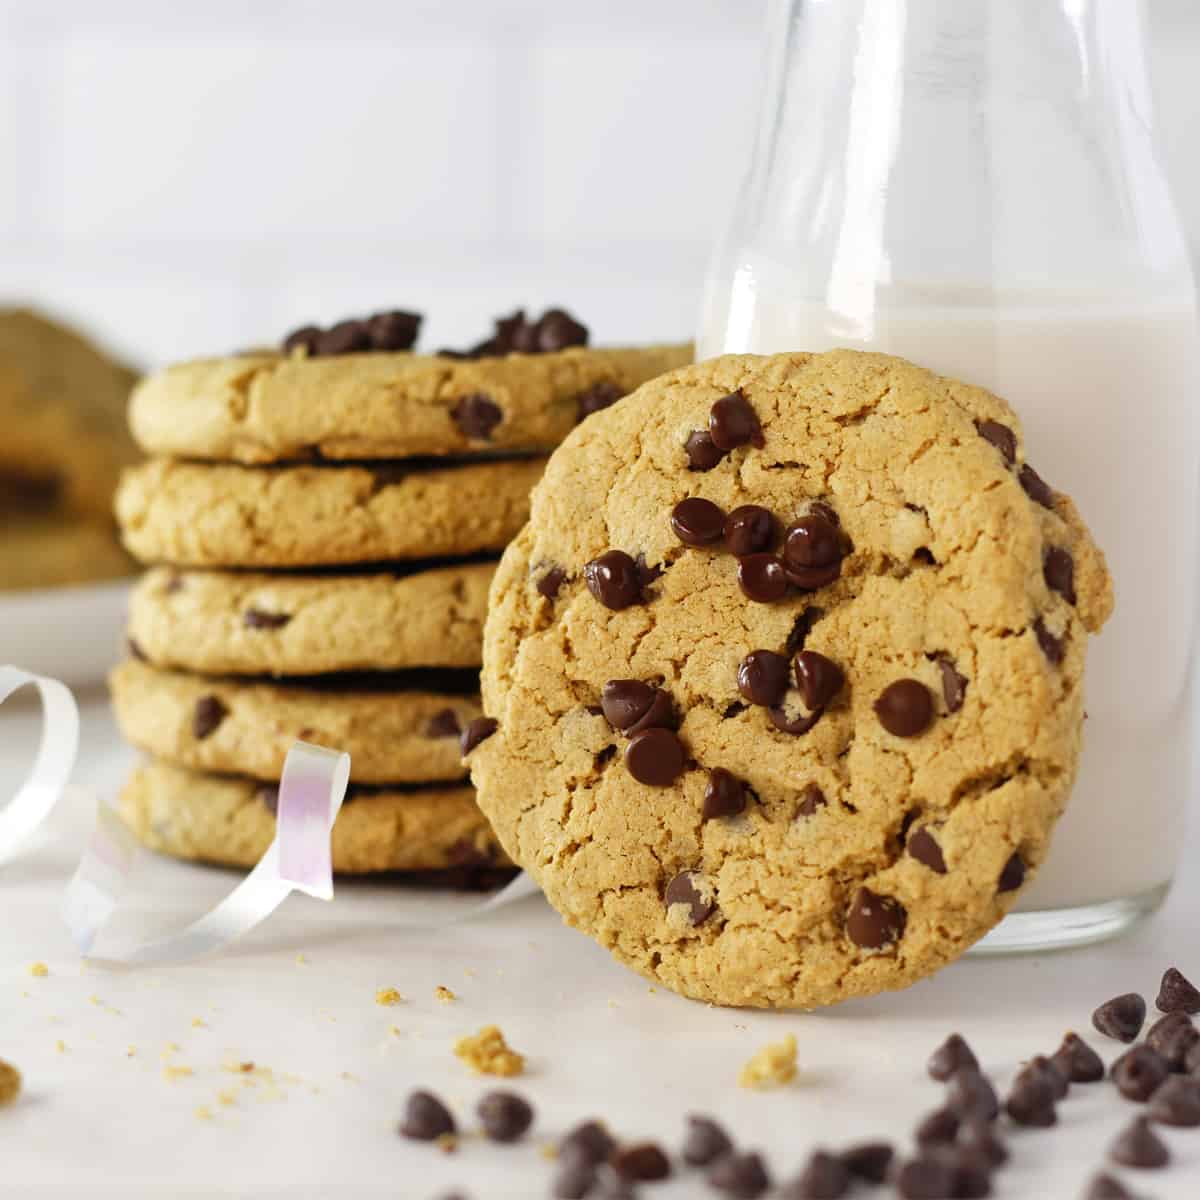 Oat Flour Chocolate Chip Cookies leaning on each other